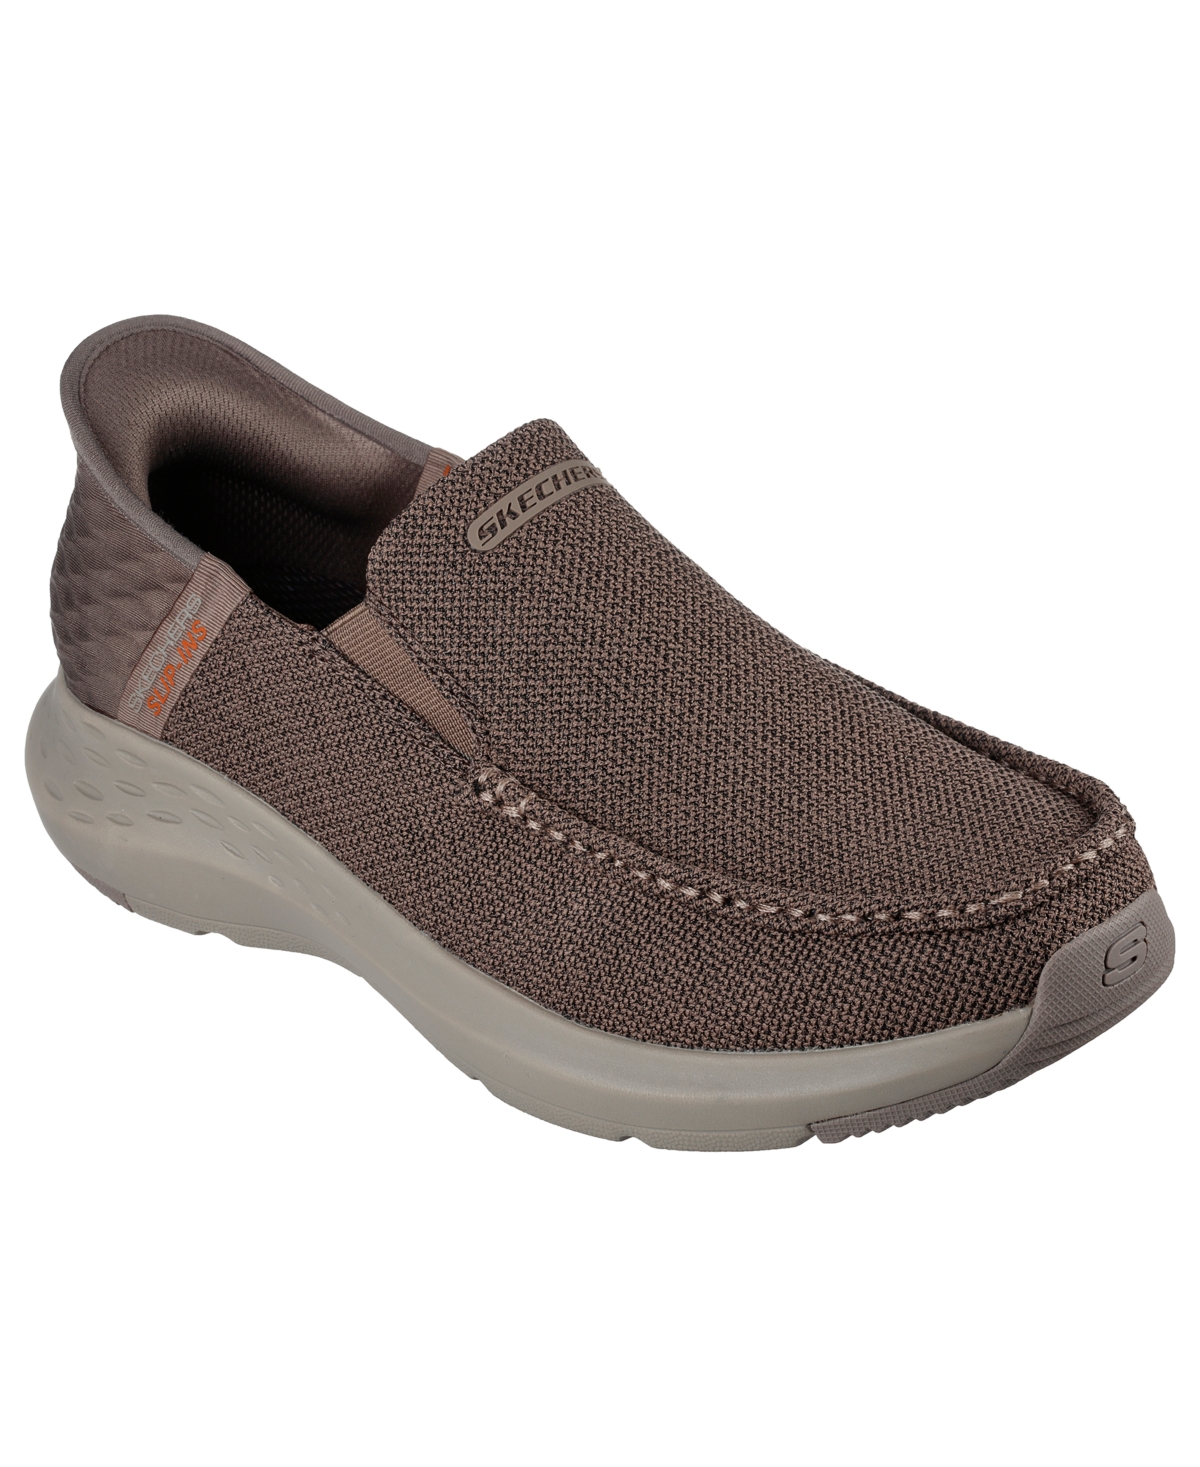 Skechers Men's Slip-ins- Parson Ralven Moc Toe Wide Width Casual Sneakers From Finish Line In Taupe